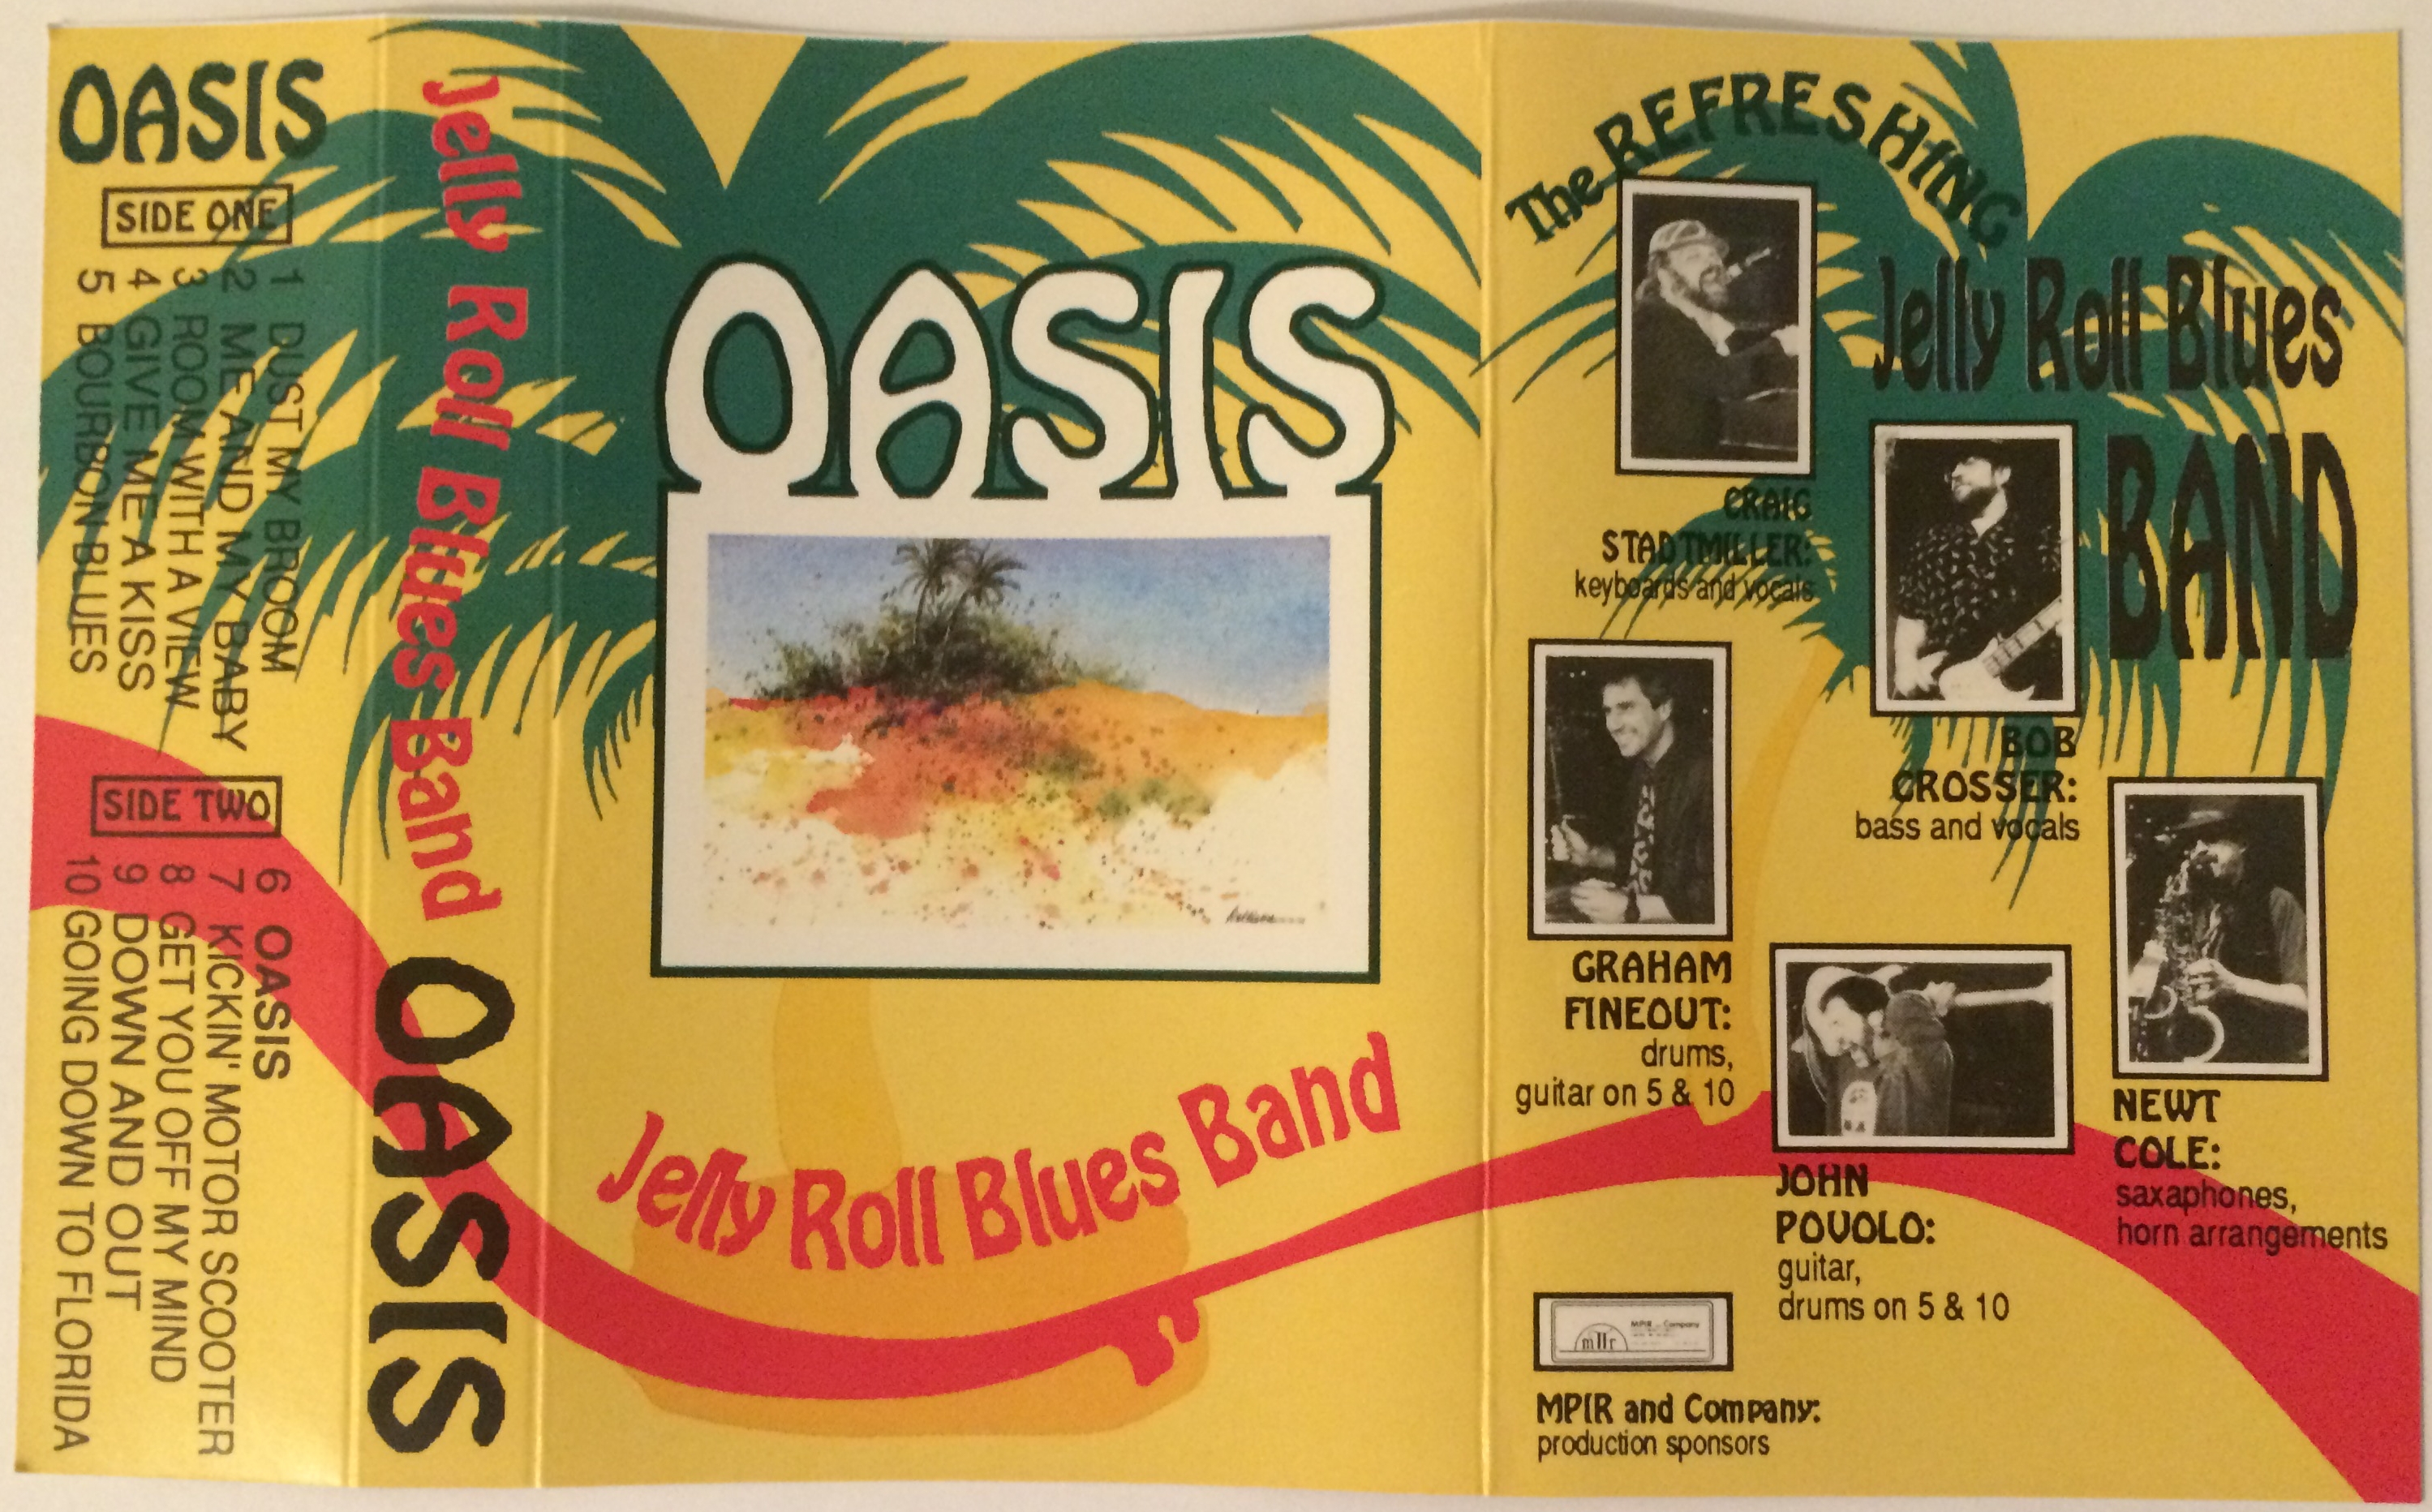 Jelly Roll Band Blues - Oasis